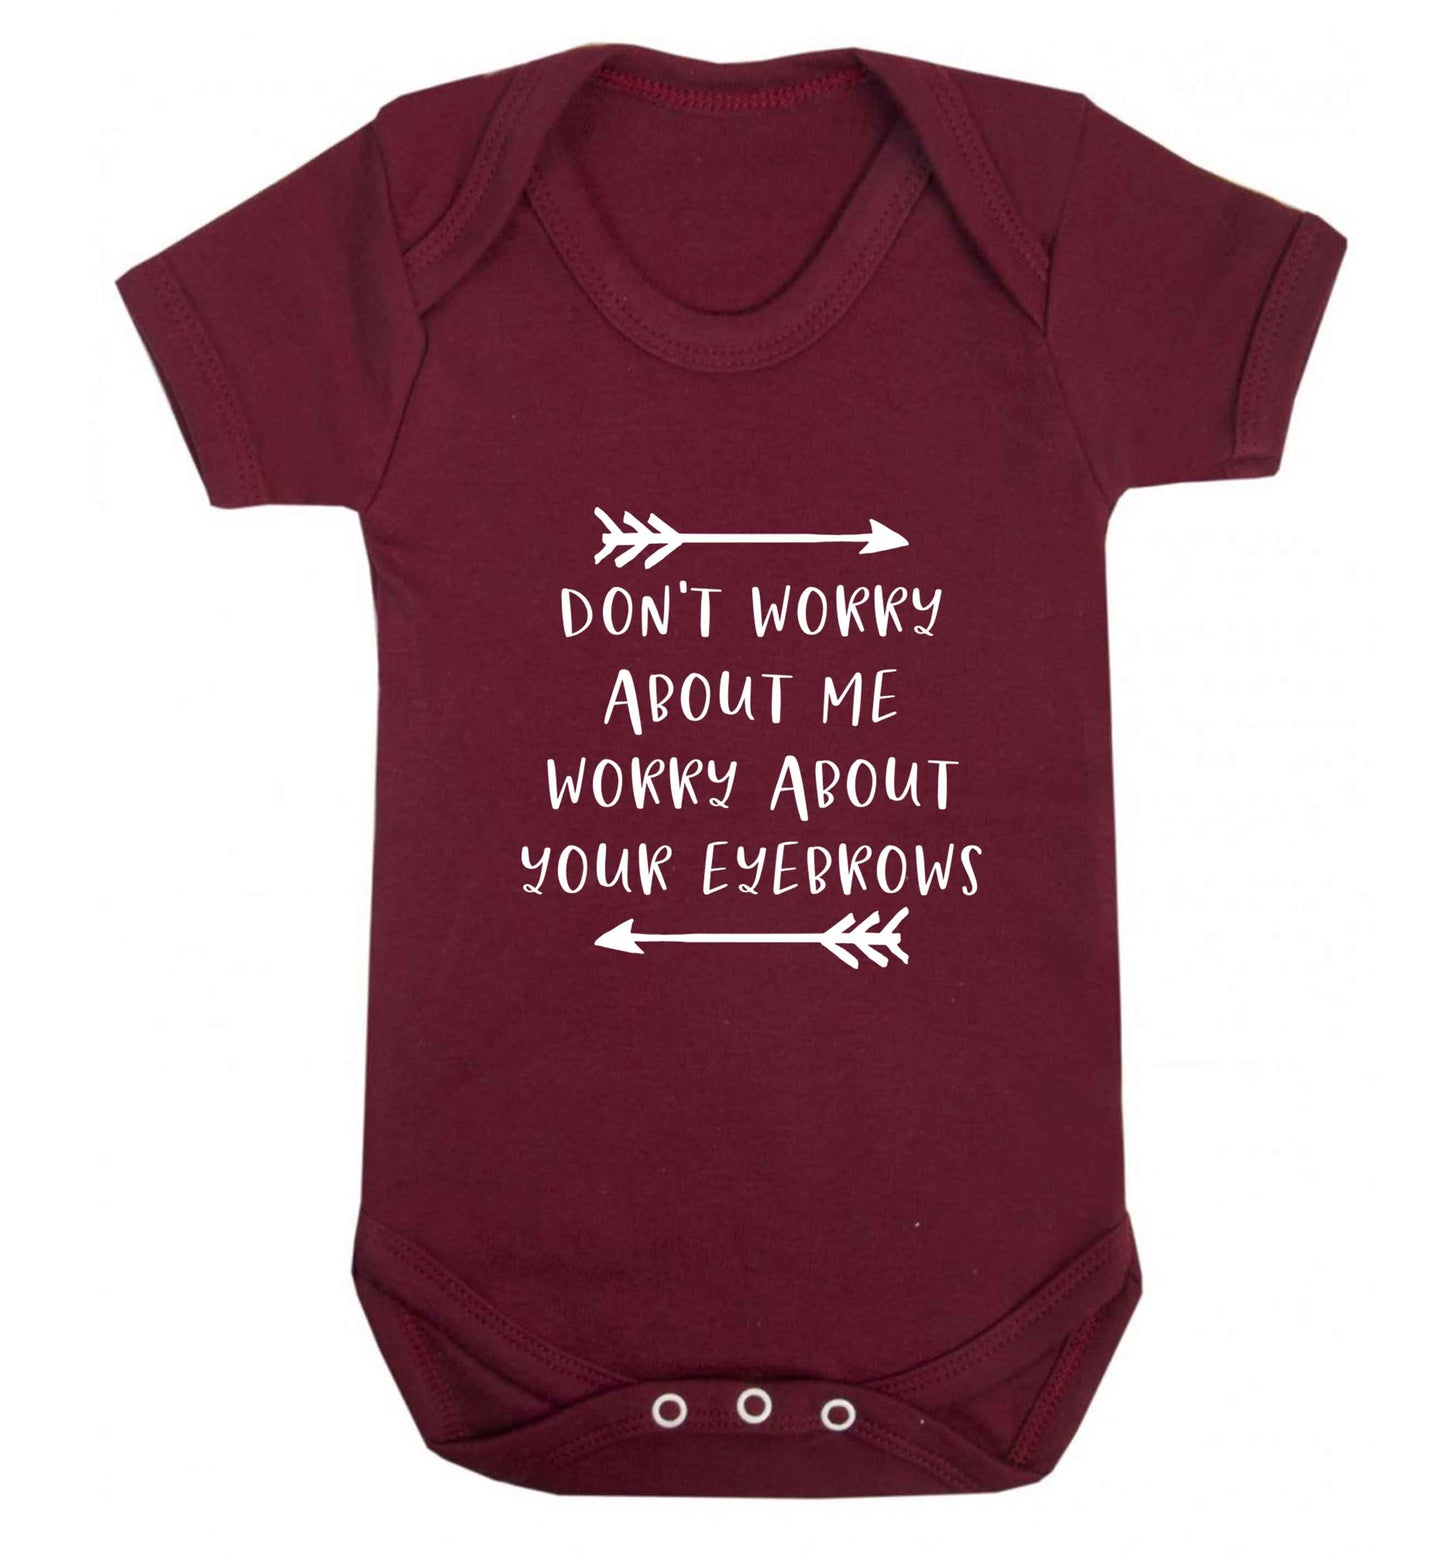 Don't worry about me worry about your eyebrows baby vest maroon 18-24 months